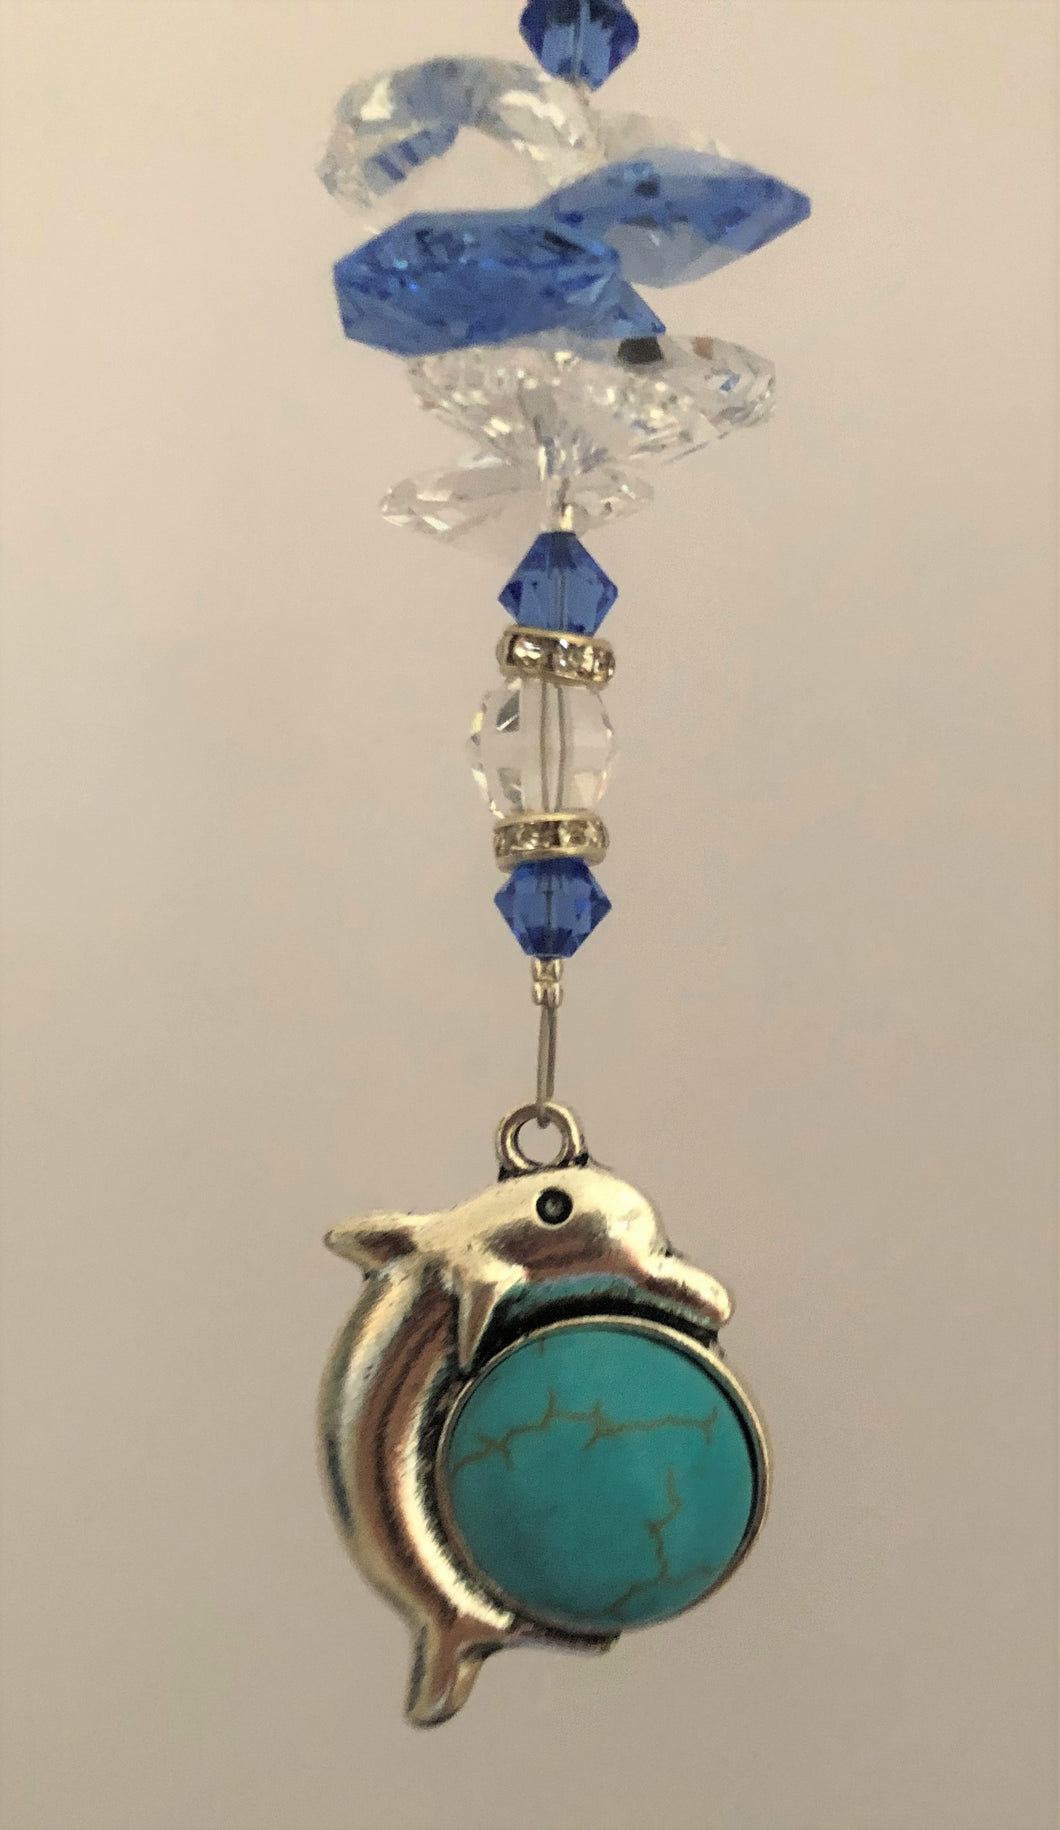 This beautiful Dolphin suncatcher which is decorated with crystals and Lapis Lazuli